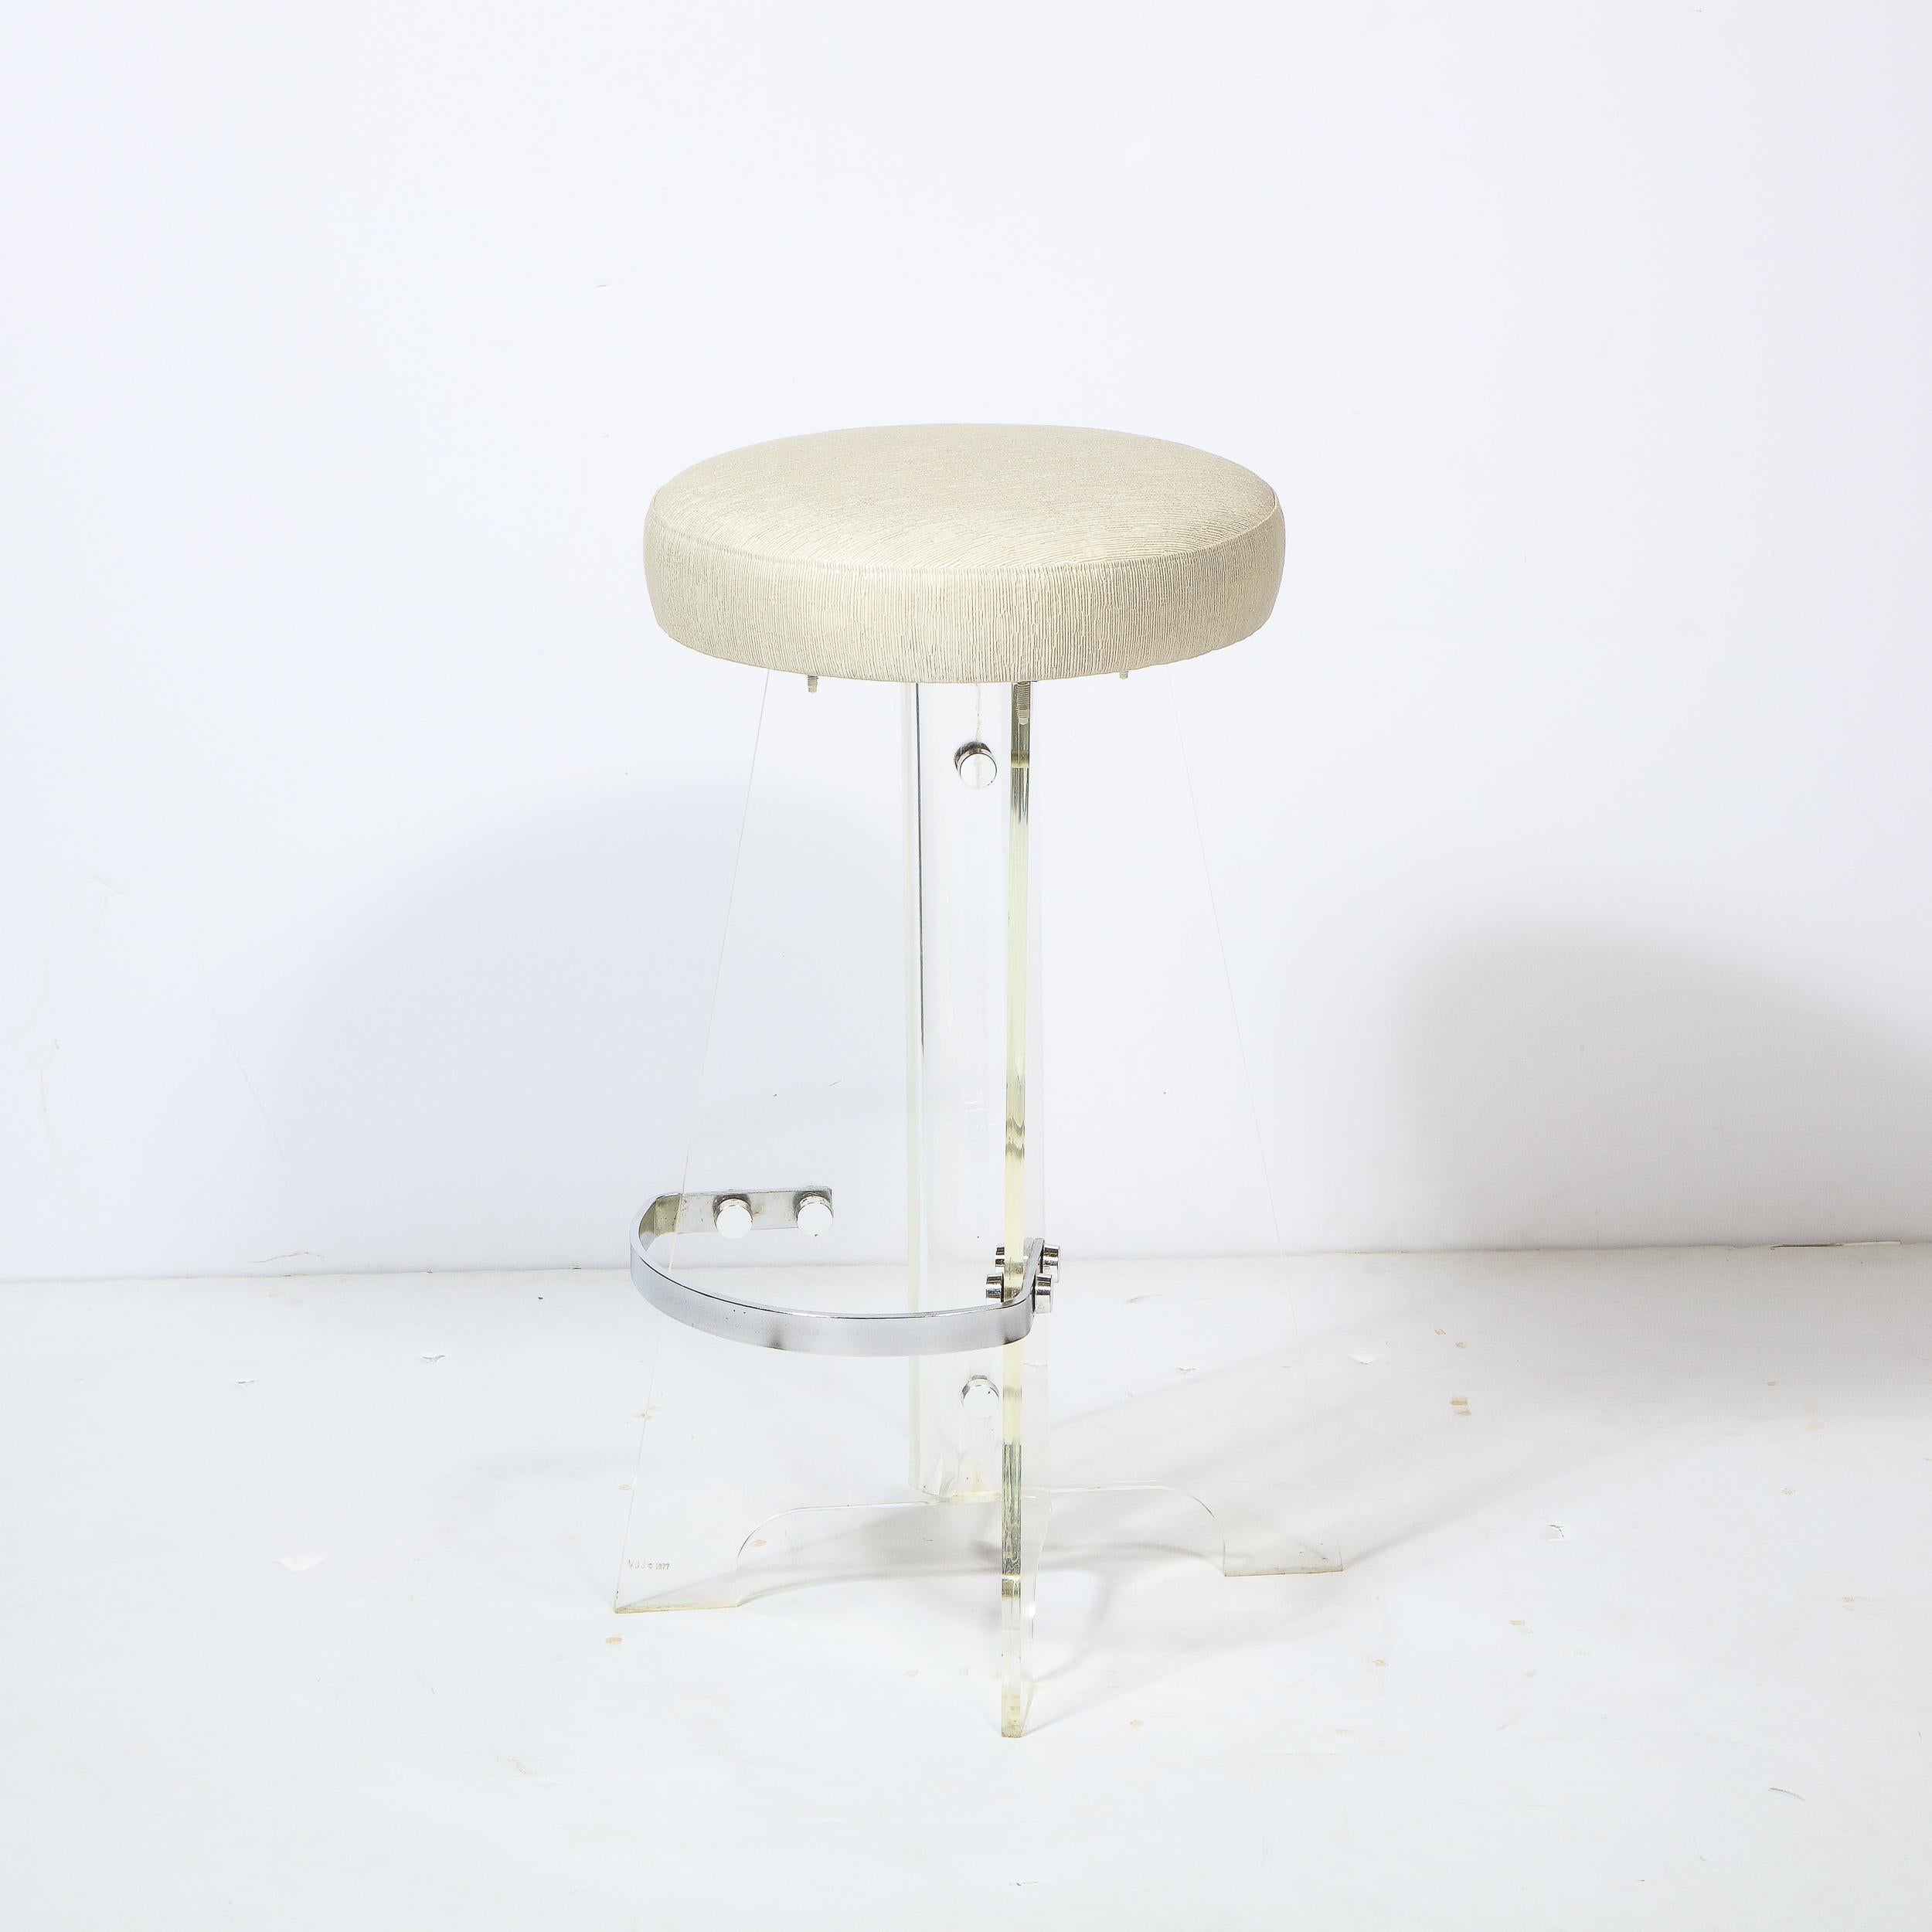 Fabric Pair of Mid-Century Modern Lucite, Chrome Bar Stools in Holly Hunt Upholstery For Sale